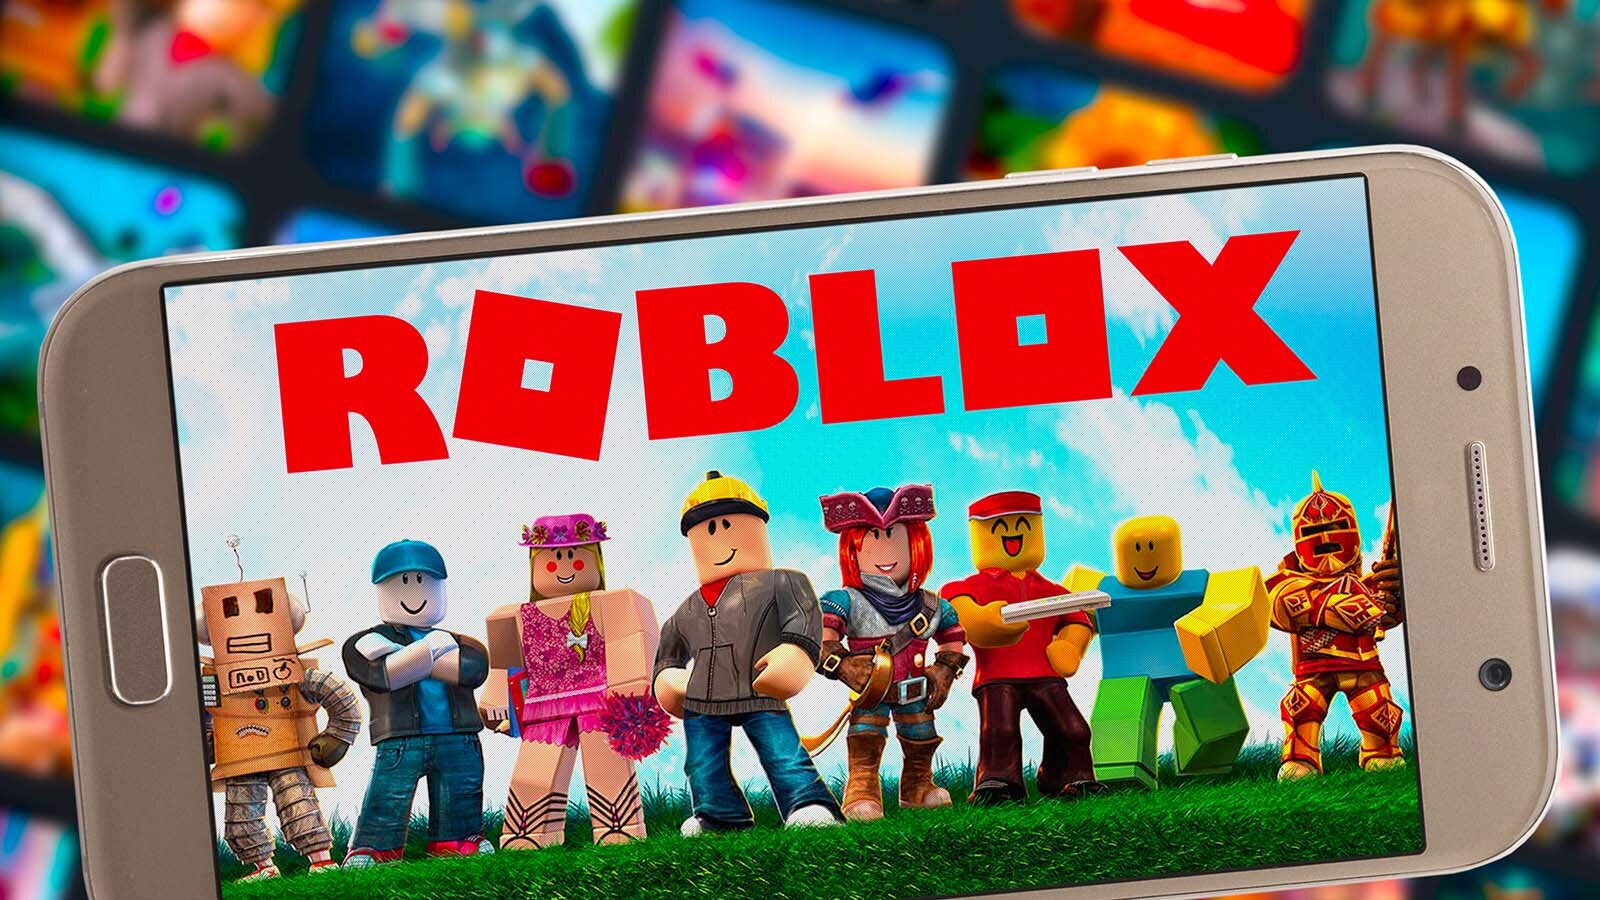 Roblox CEO: 'We're being very, very careful in China